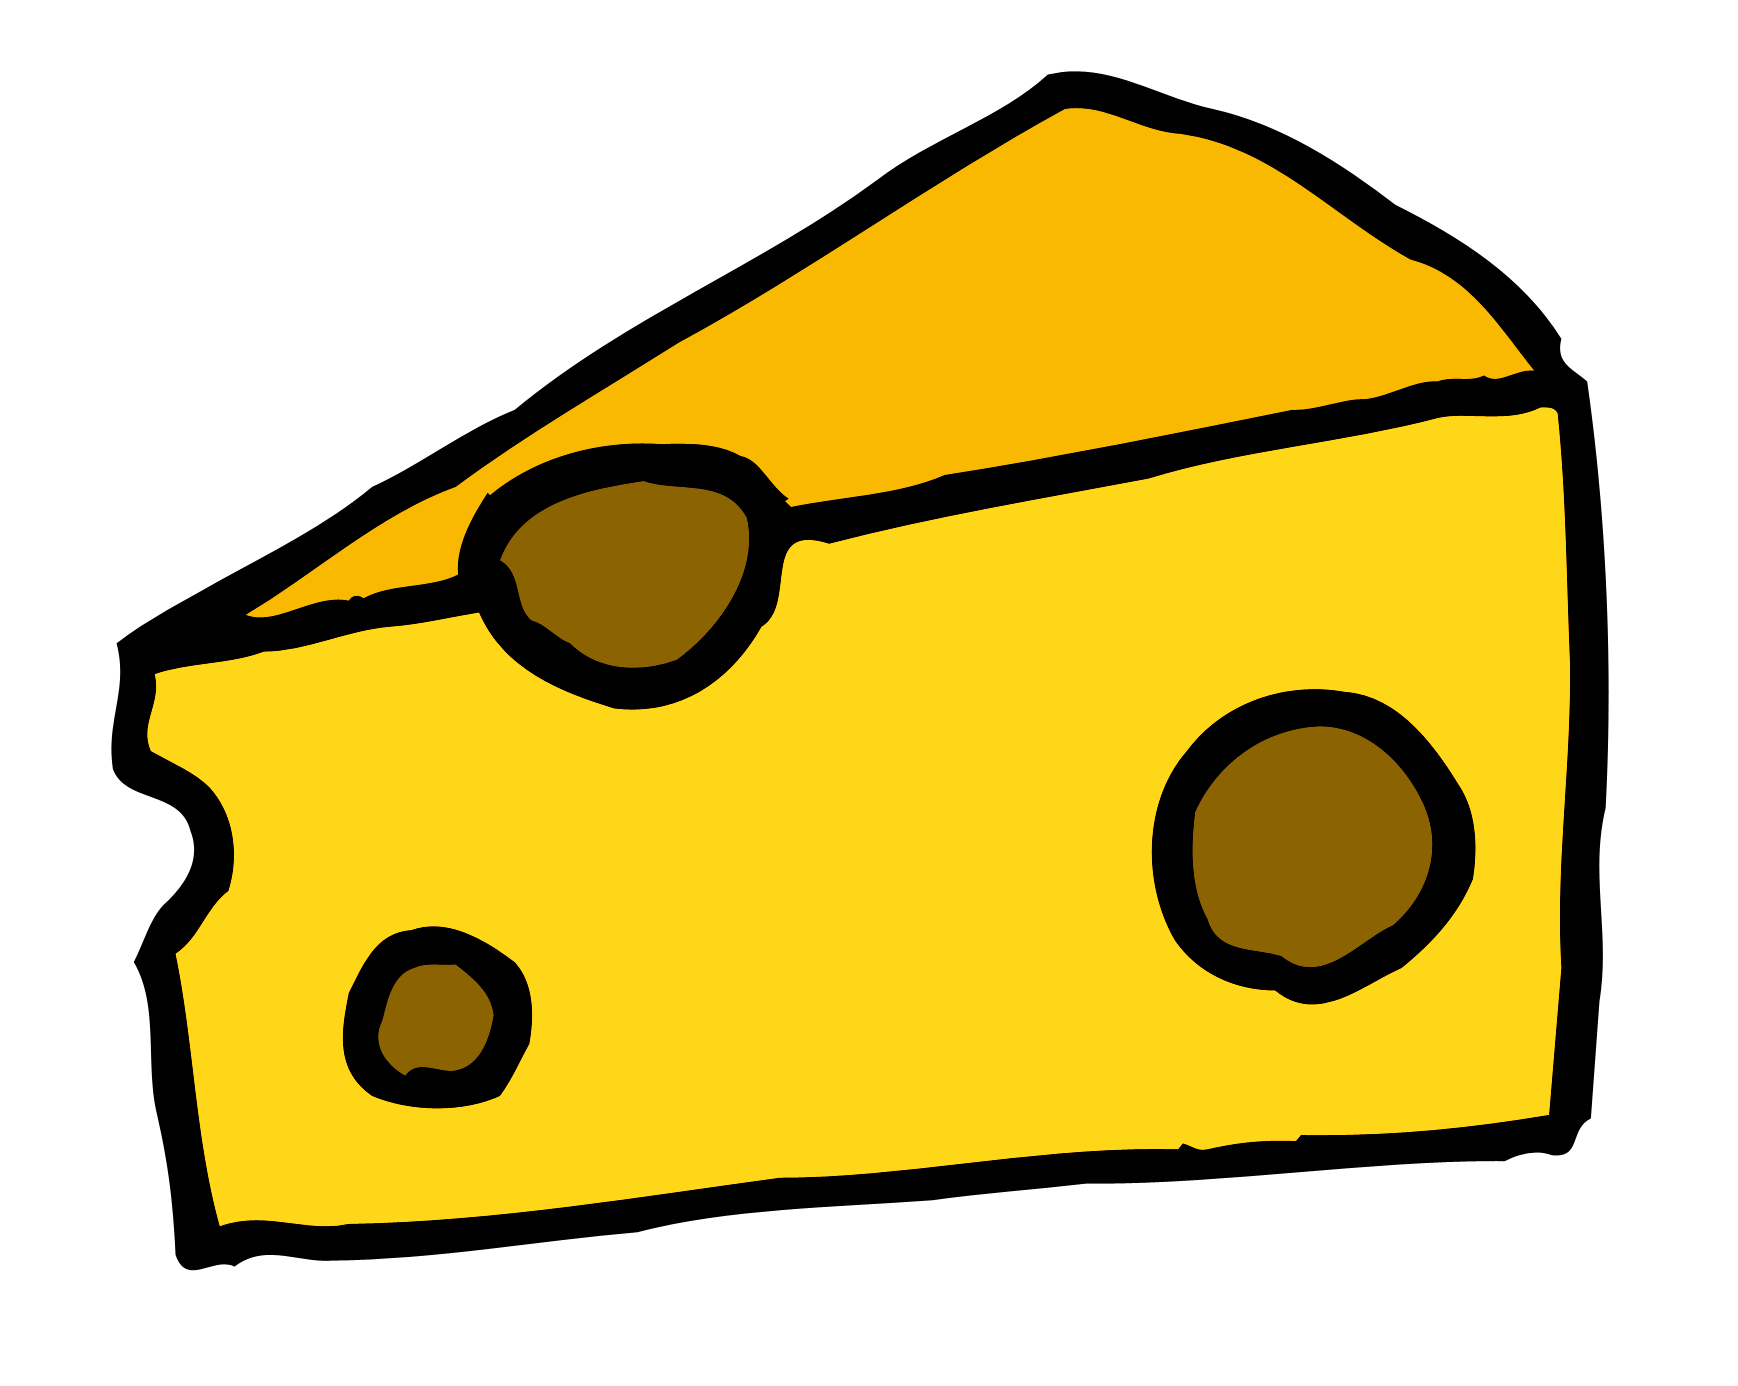 Cheese clipart png